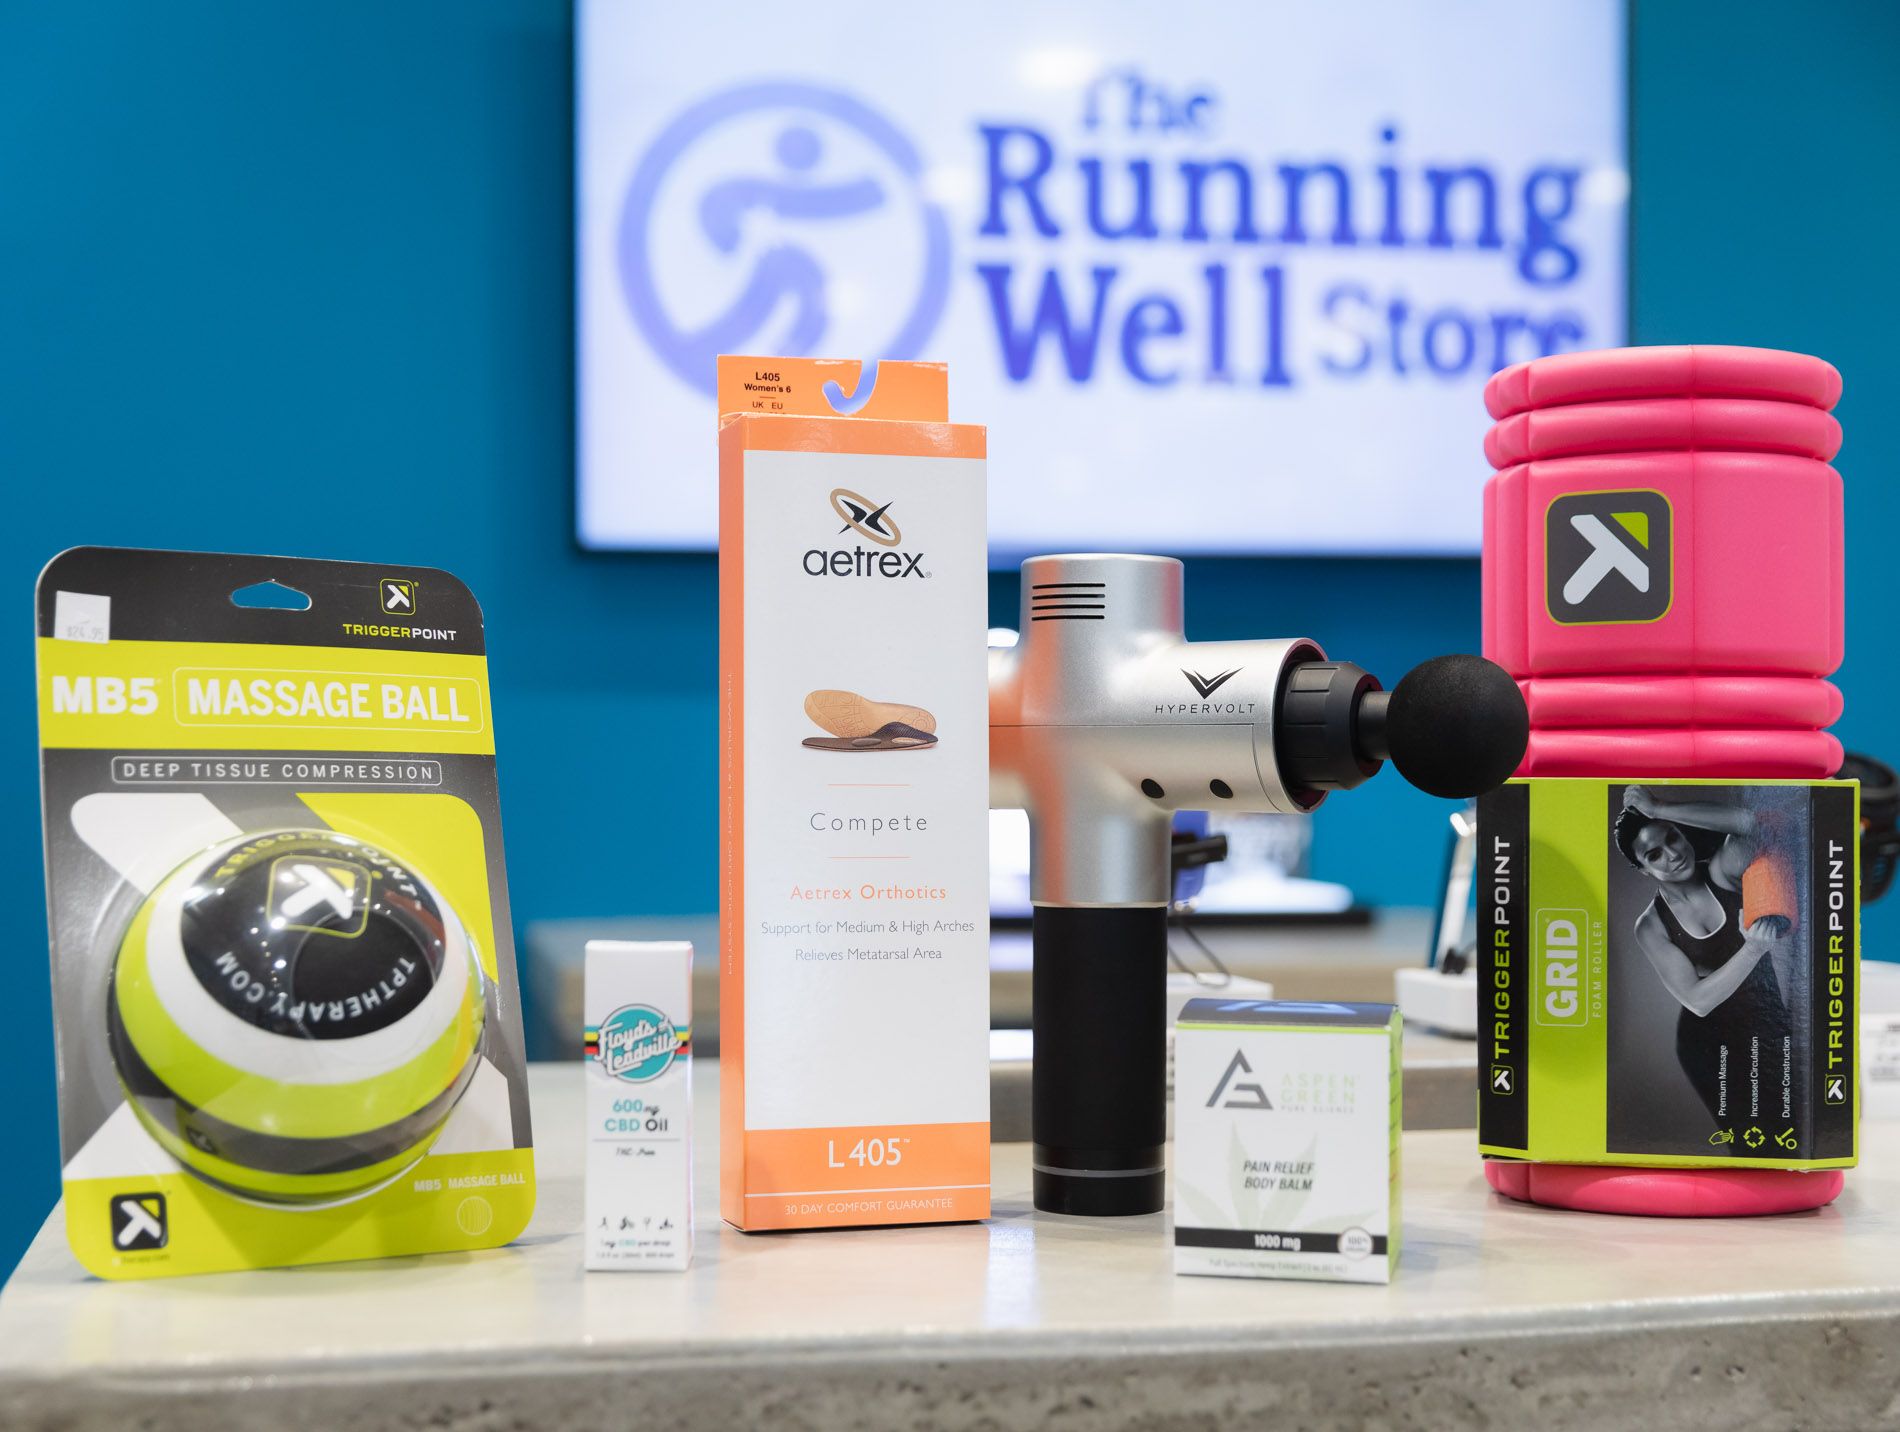 specialty back pain relief products available in kansas city at the running well store